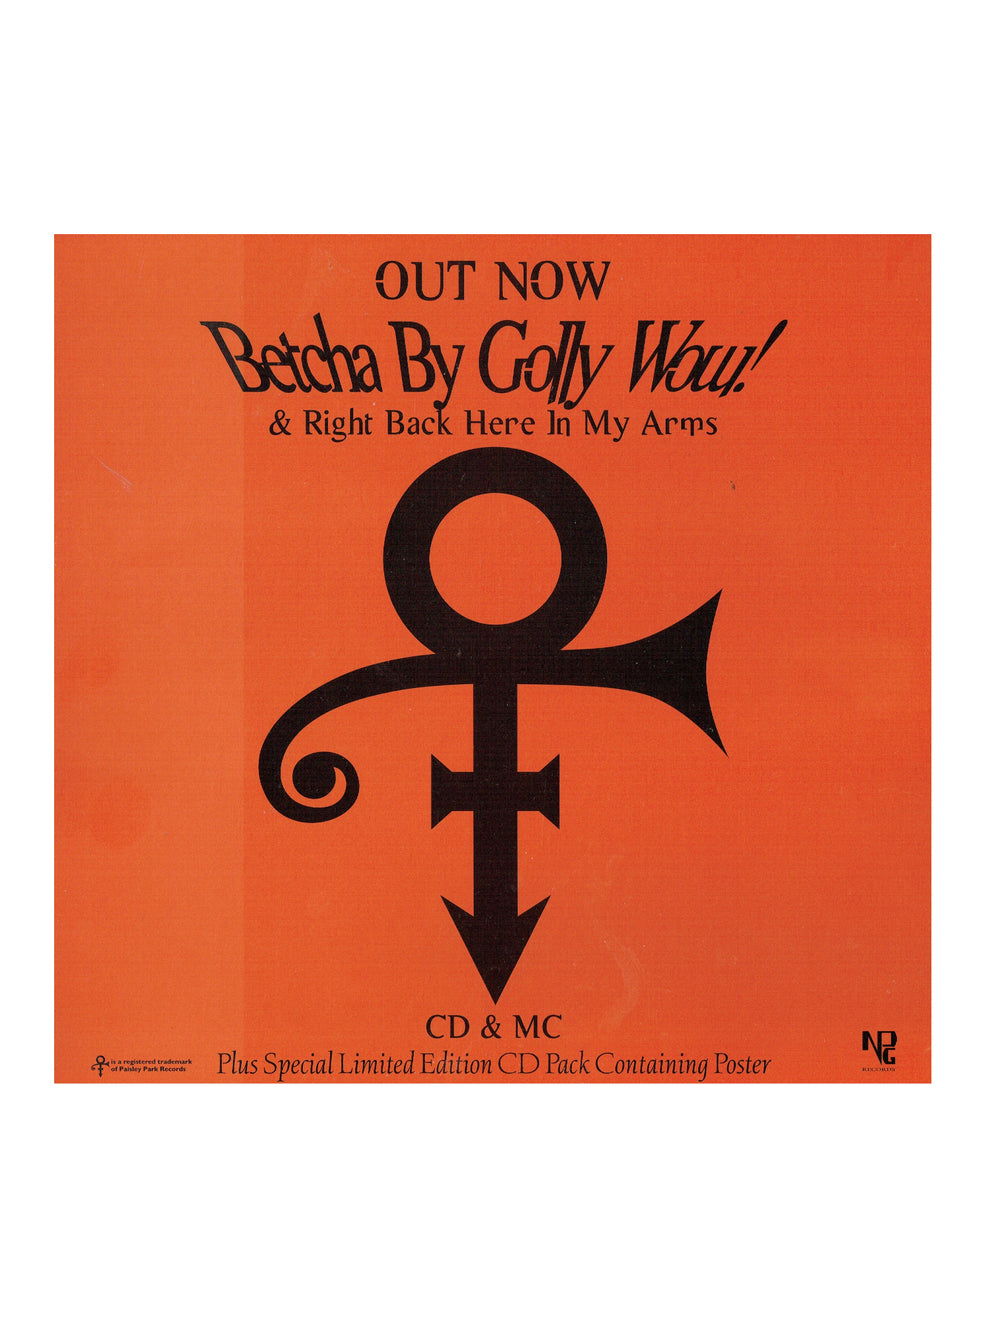 Prince – O(+> Betcha By Golly Wow! Instore Promotional Display 12 x 12 Prince AS NEW O(+>